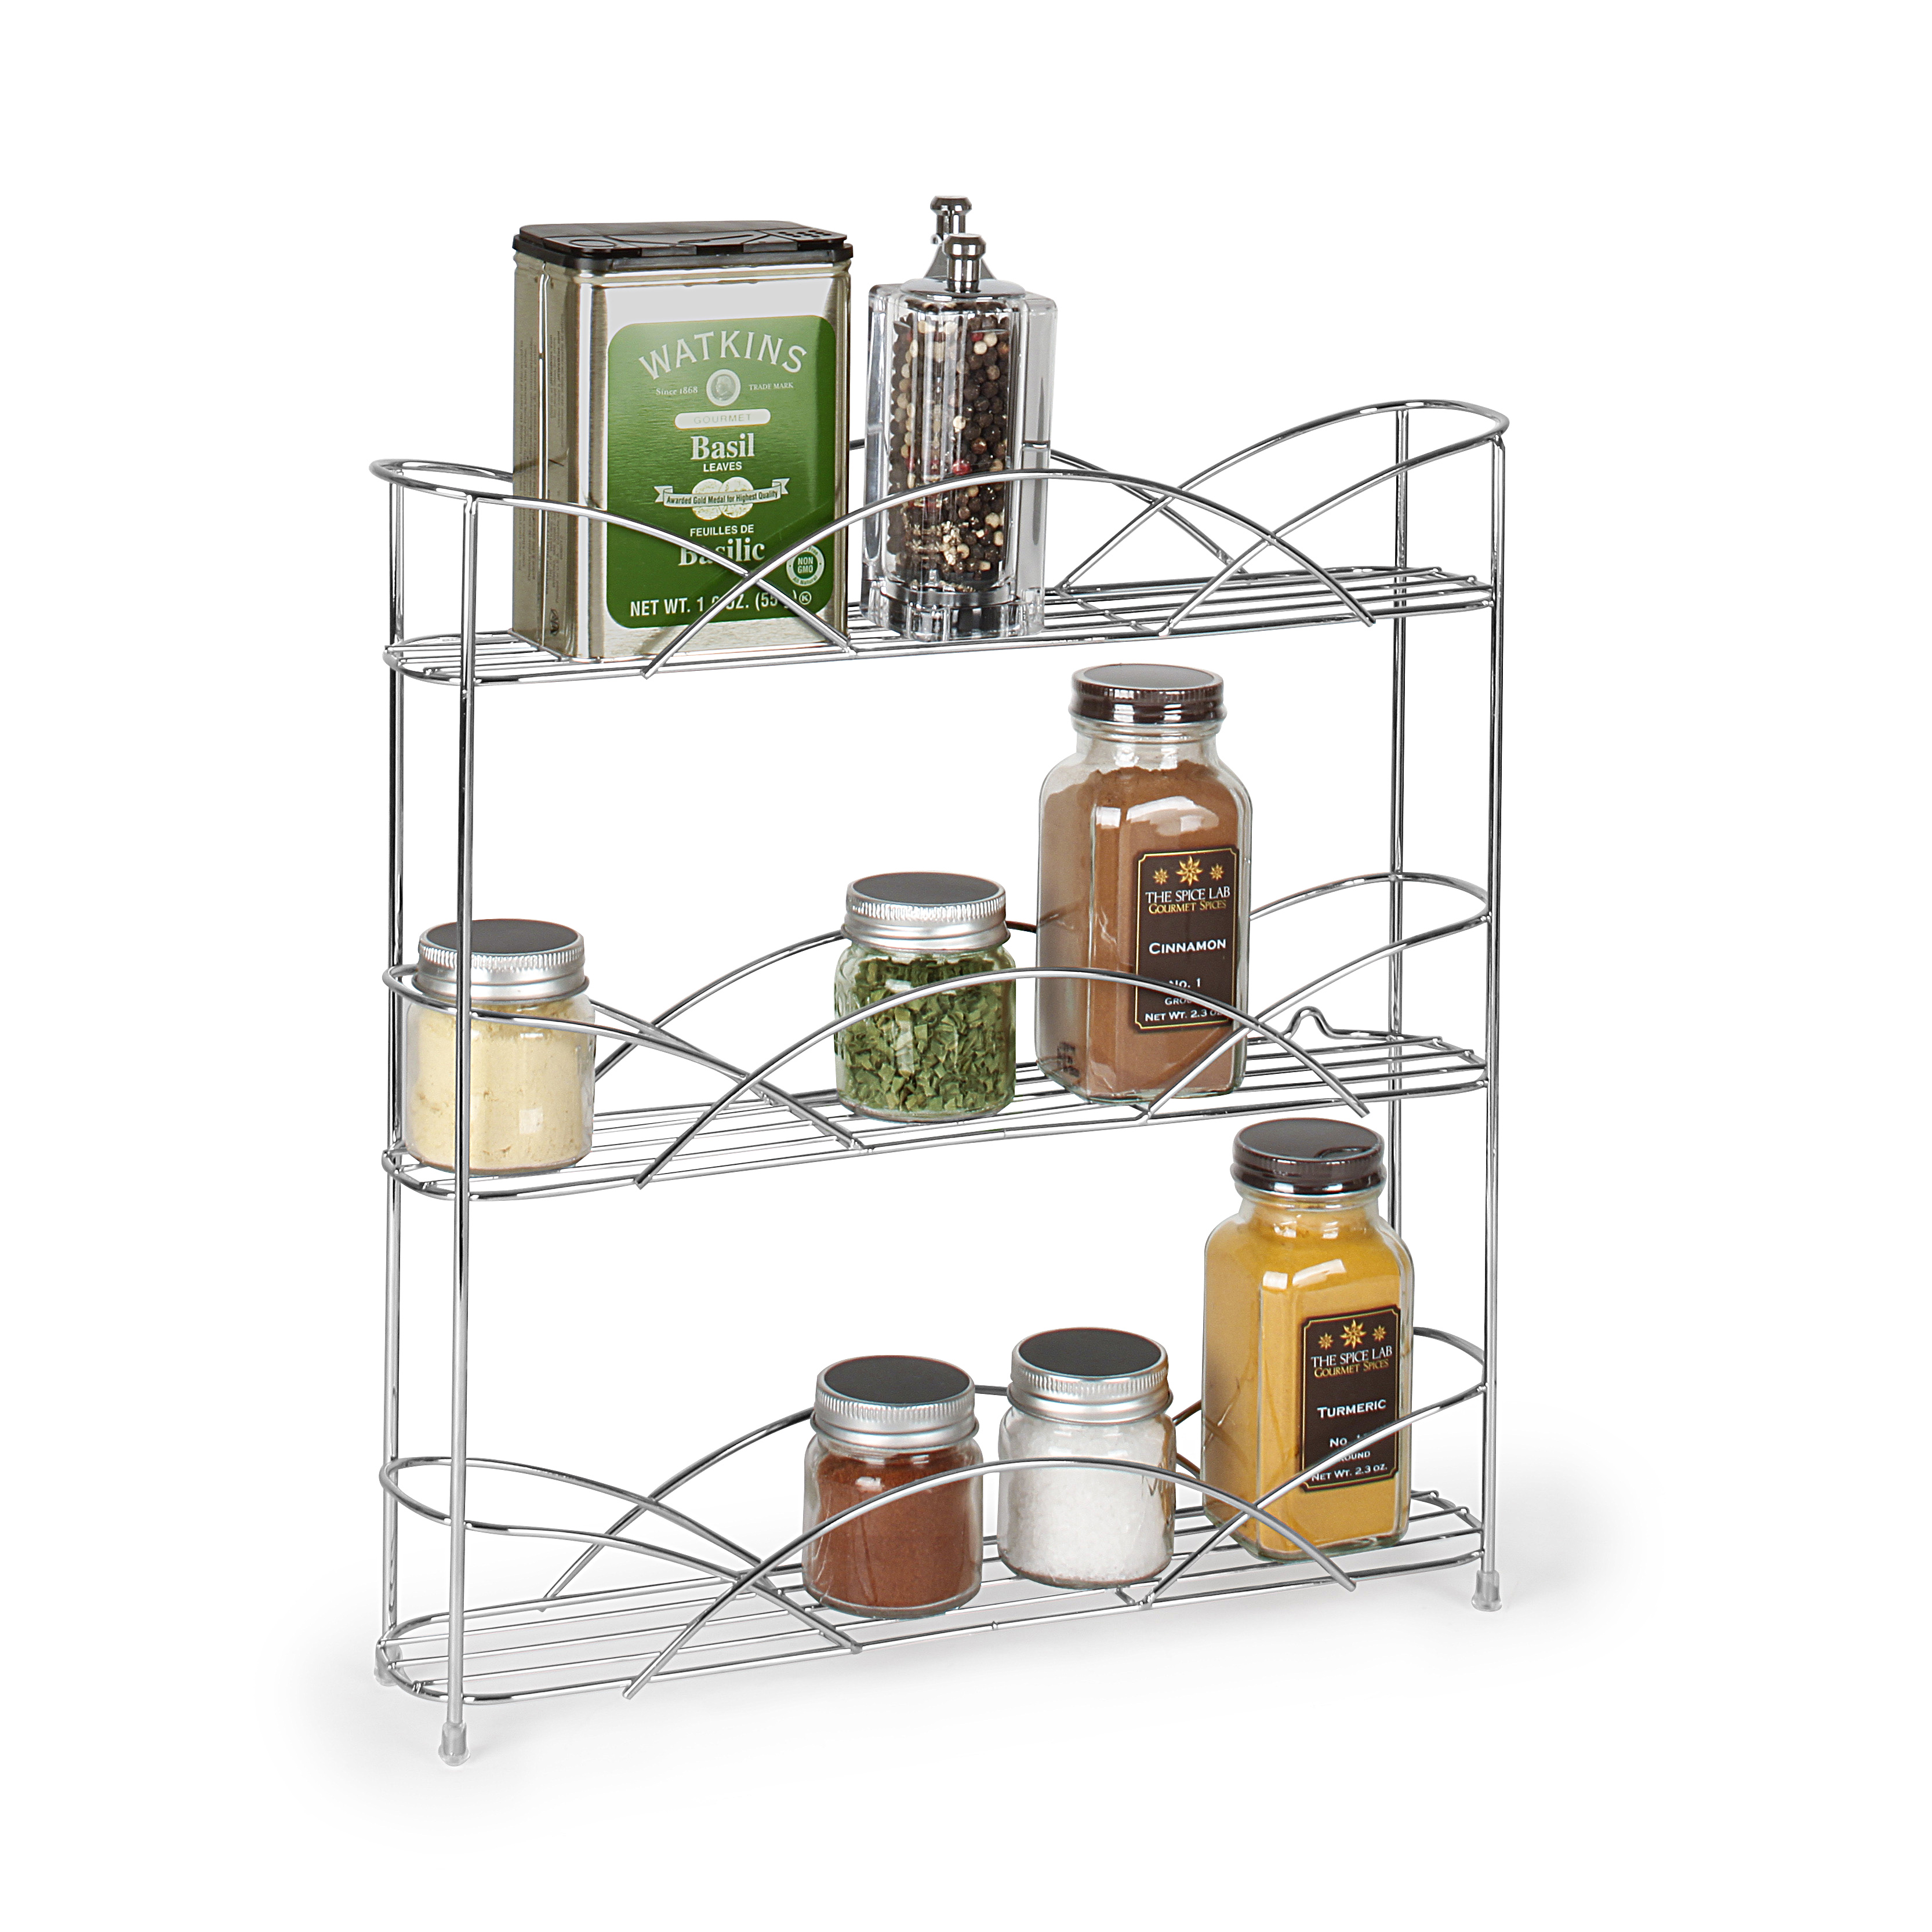 Spectrum Countertop and Wall Mount 3 Tier Spice Rack - image 2 of 7